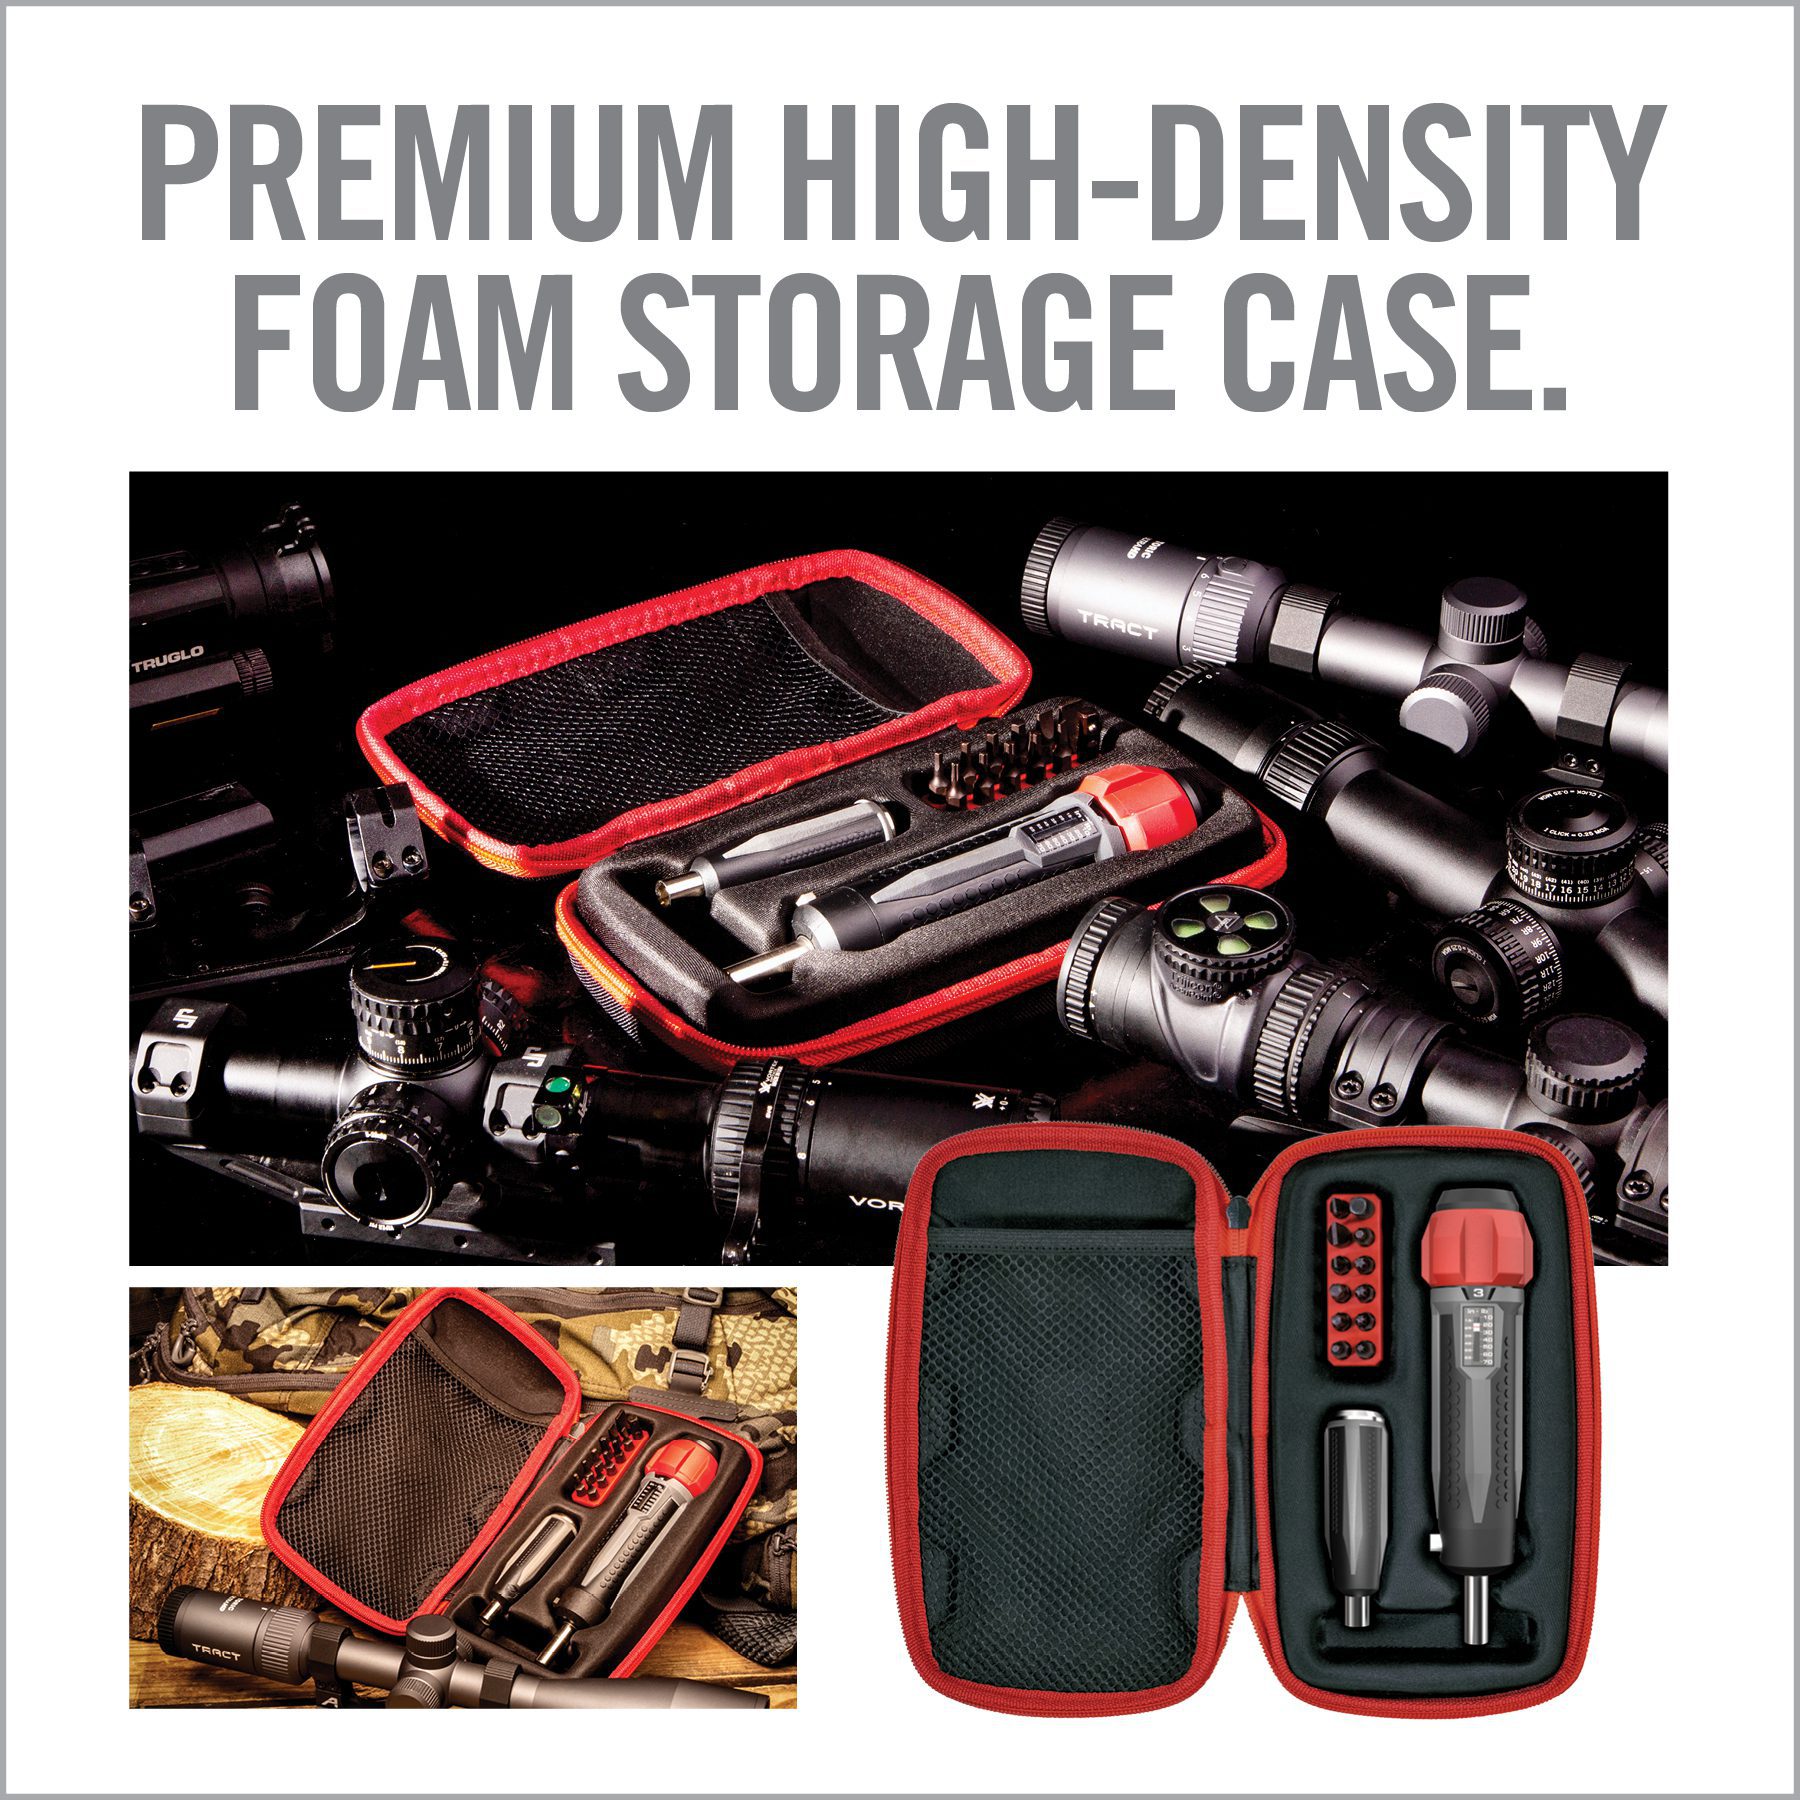 an advertisement for a foam storage case